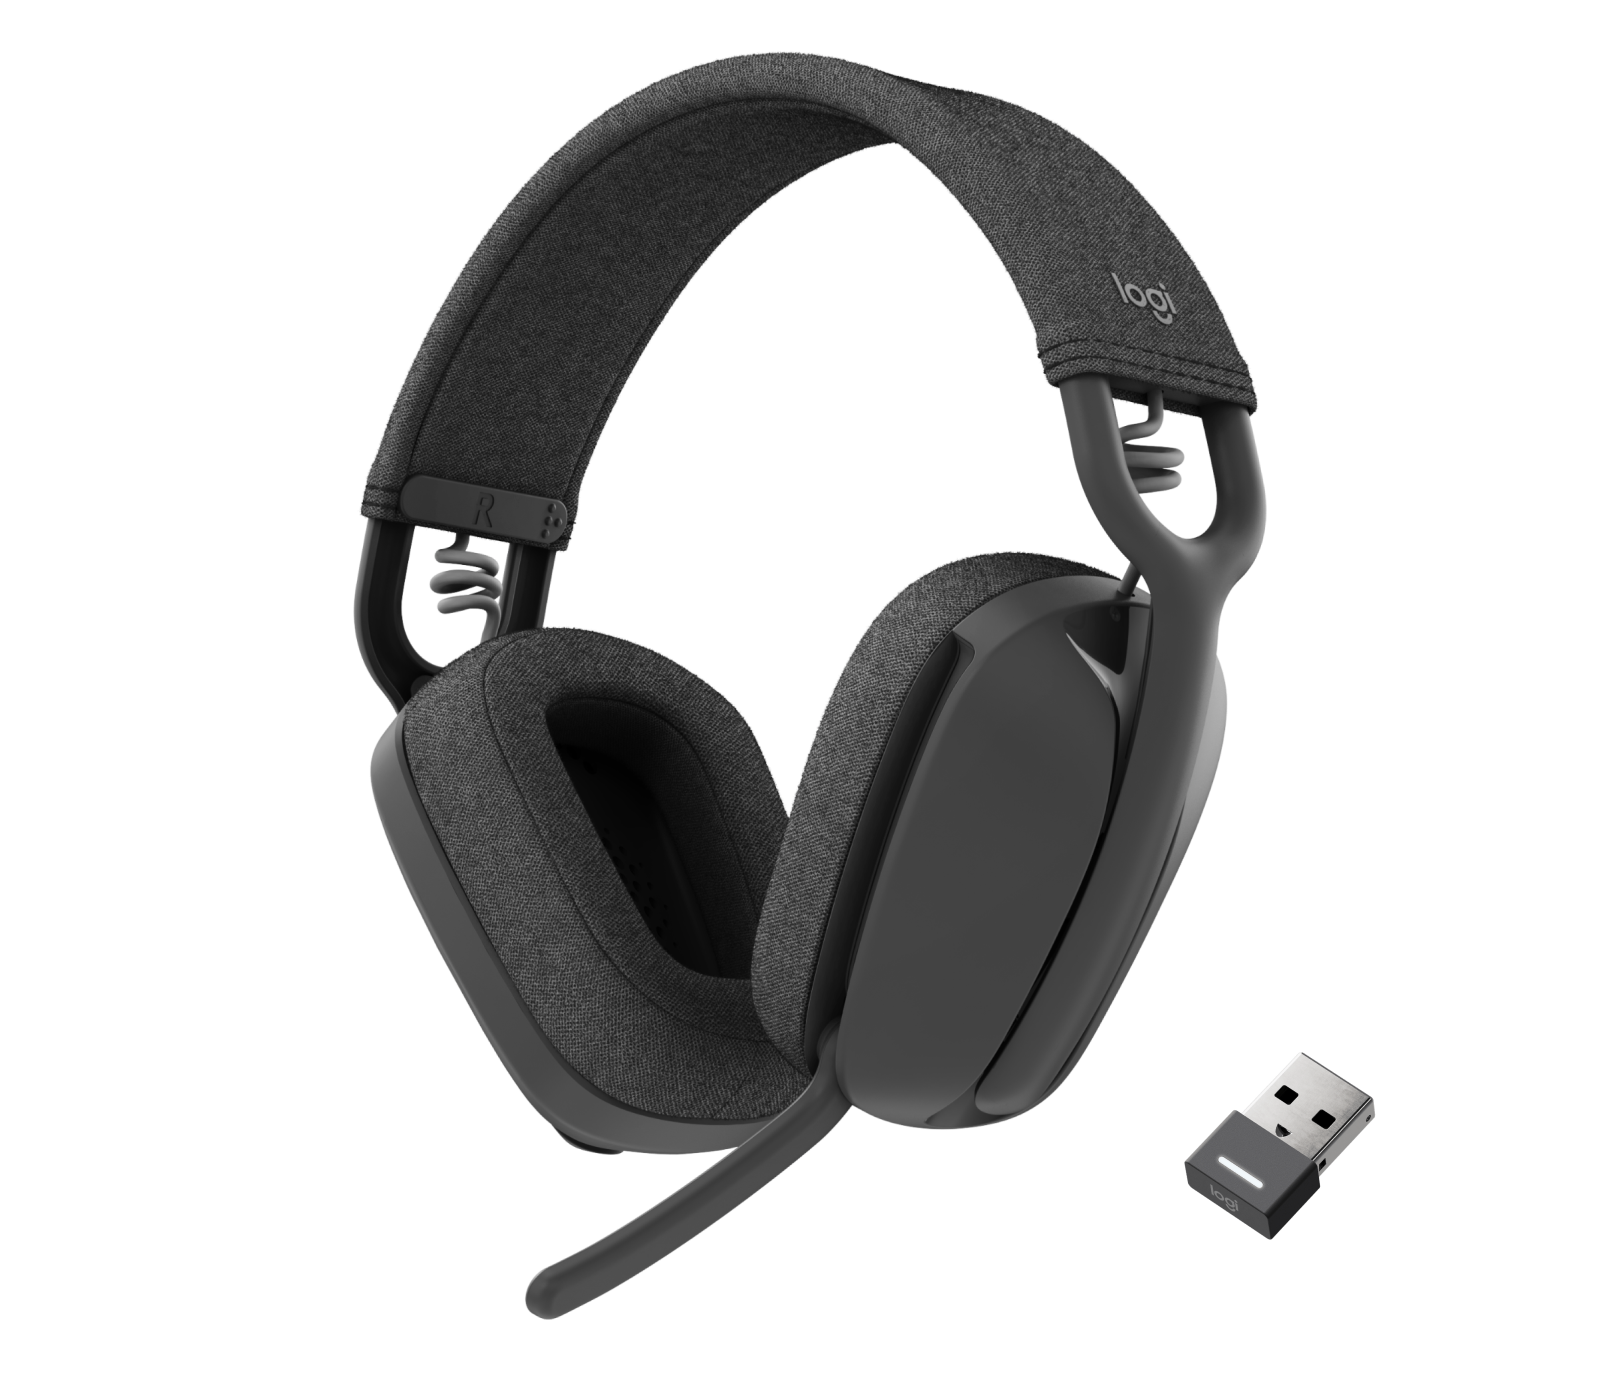 Logitech G535 Wireless Gaming Headset User Guide: Setup, Pairing, and More